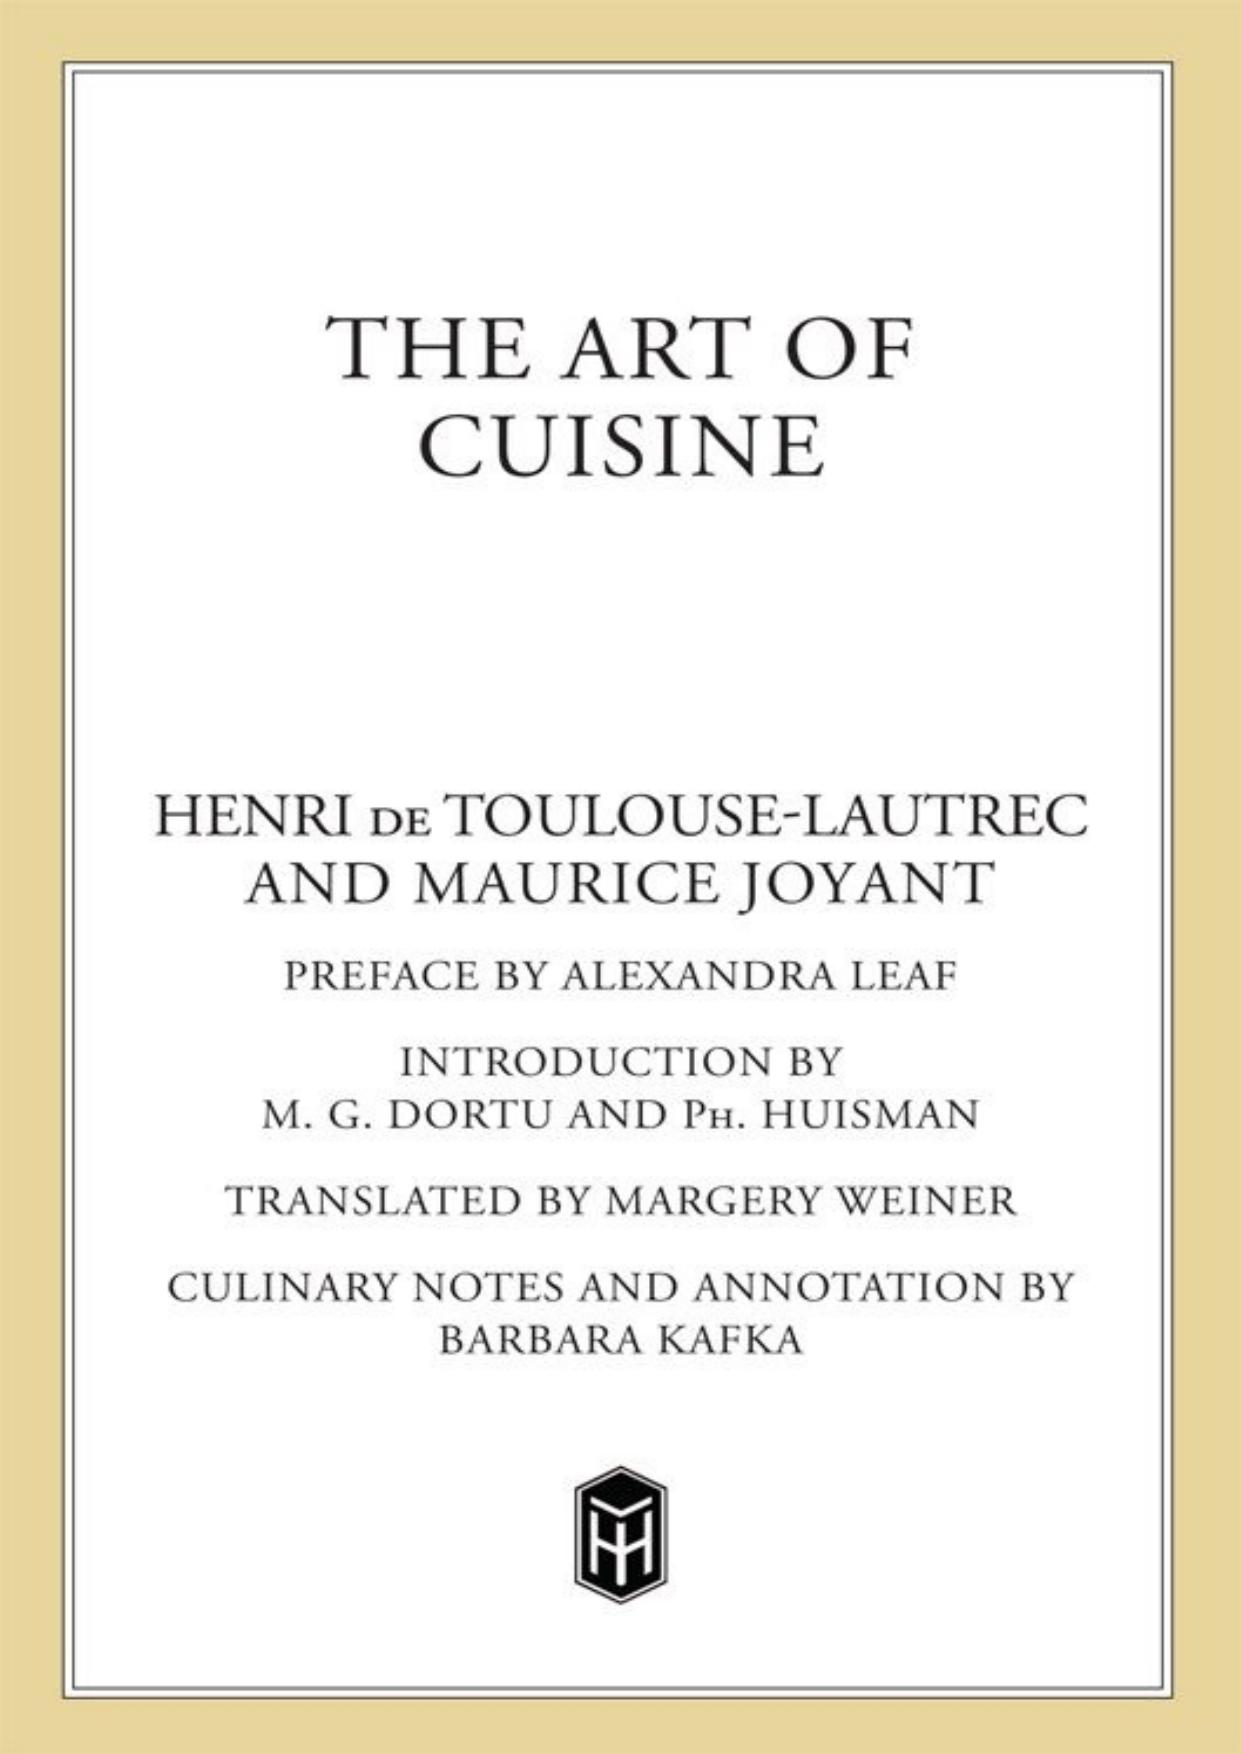 The Art of Cuisine by Maurice Joyant